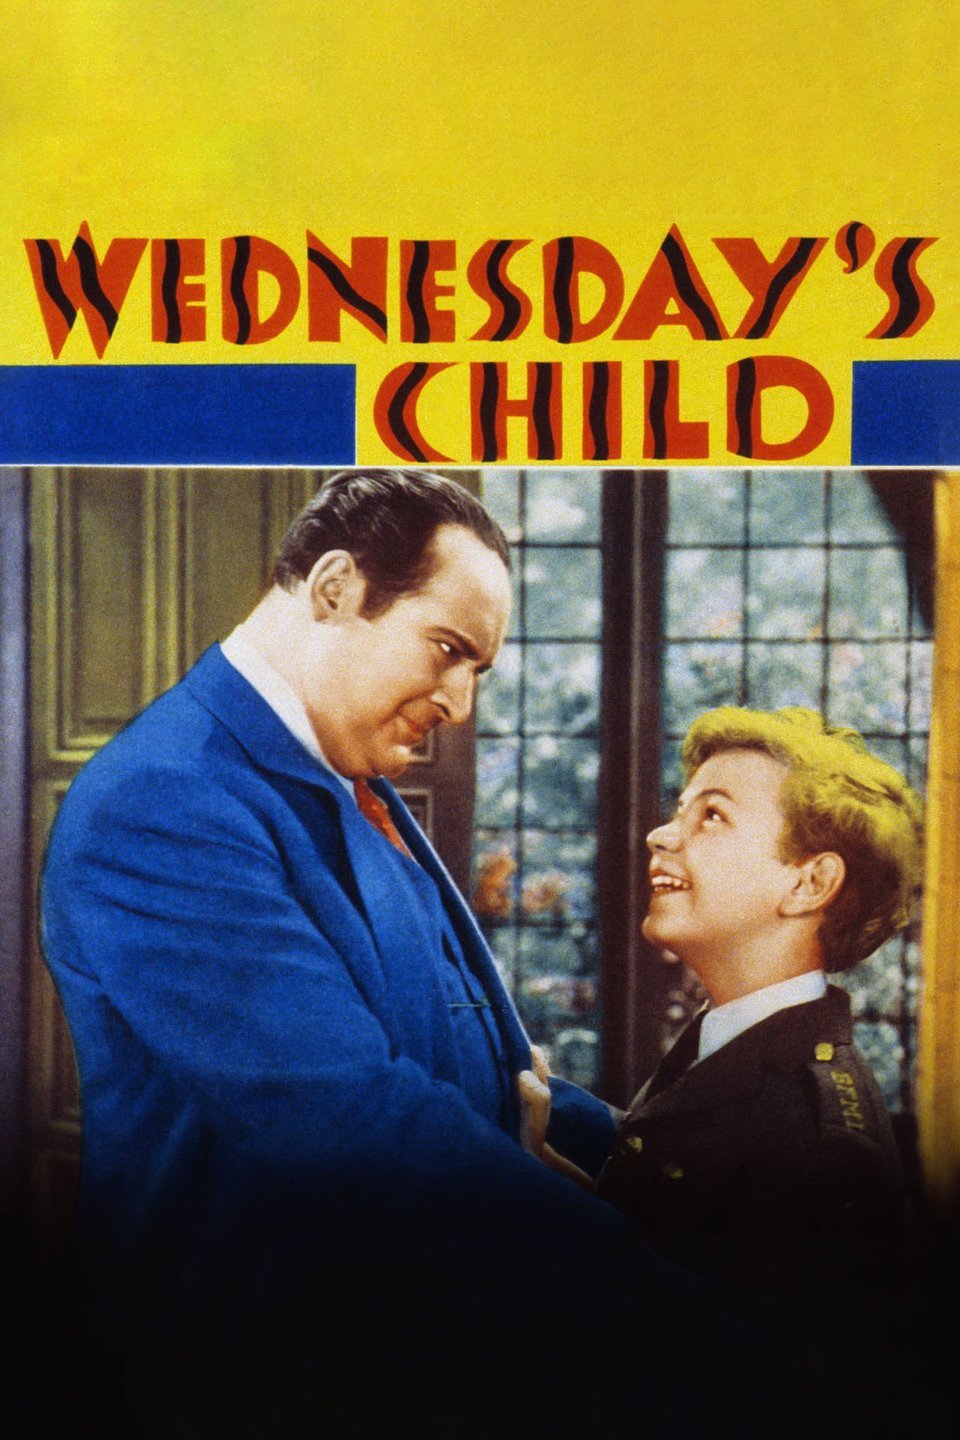 wednesday movie review rotten tomatoes